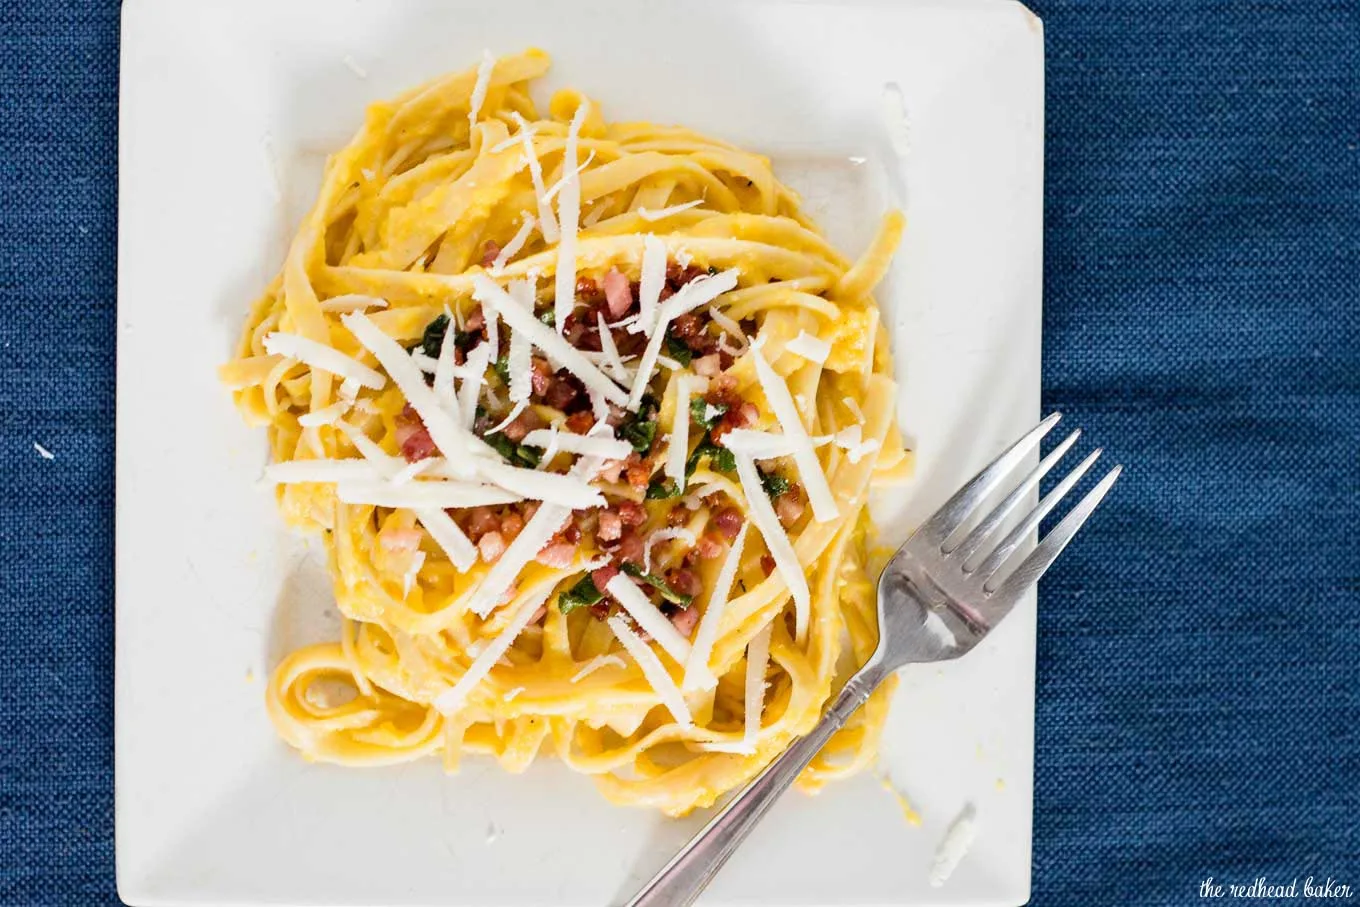 Not a true pasta carbonara, this dish uses pureed butternut squash instead of egg to thicken the sauce that coats the fettuccine.